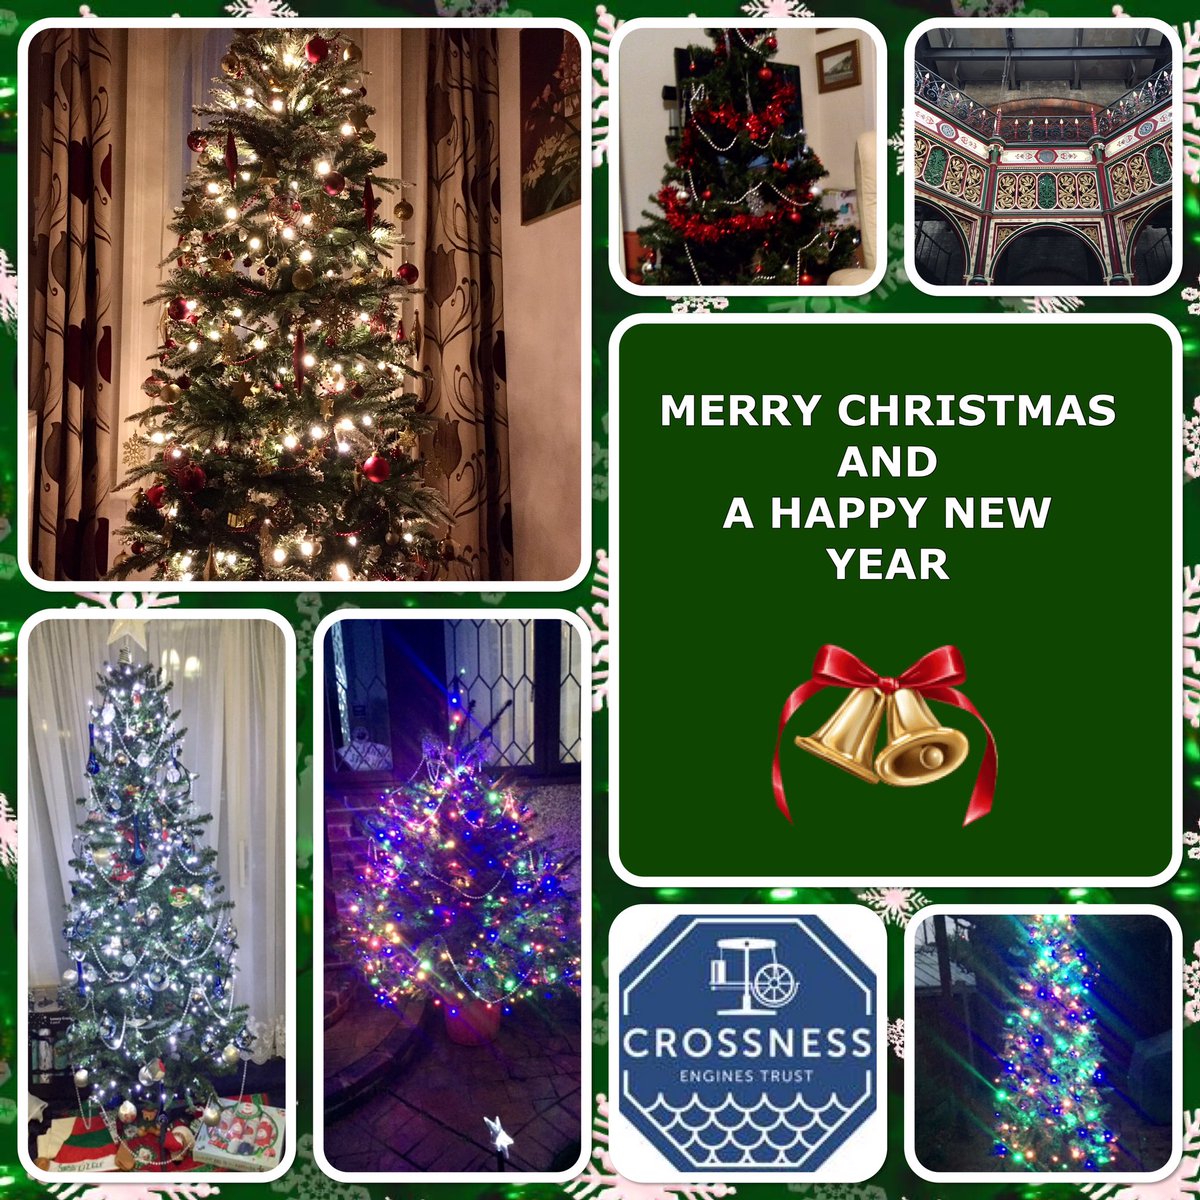 Thank you for all your support this year. The volunteers at Crossness Engines Trust wish everybody a safe and happy Christmas. Couldn’t decorate Crossness so here are our trees at home to celebrate #LightUpBexley